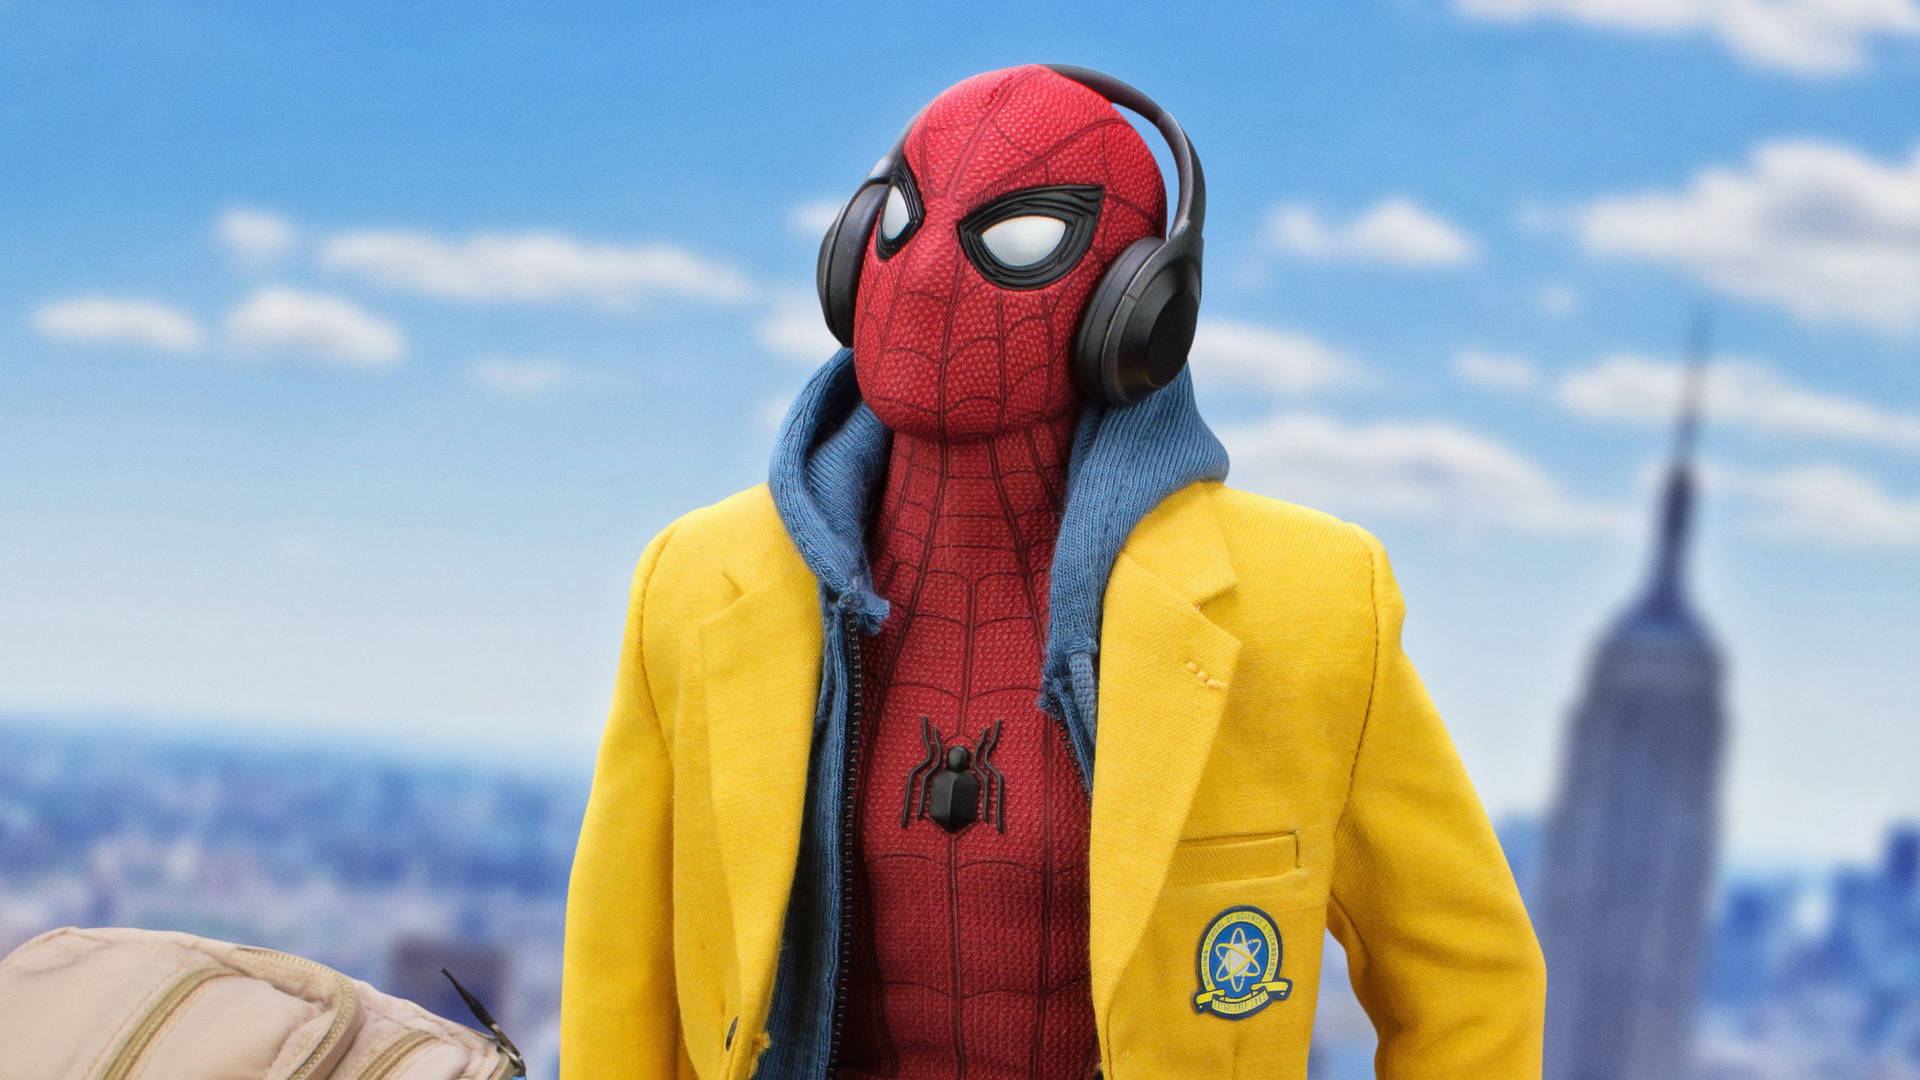 Spiderman In Yellow Jacket Background